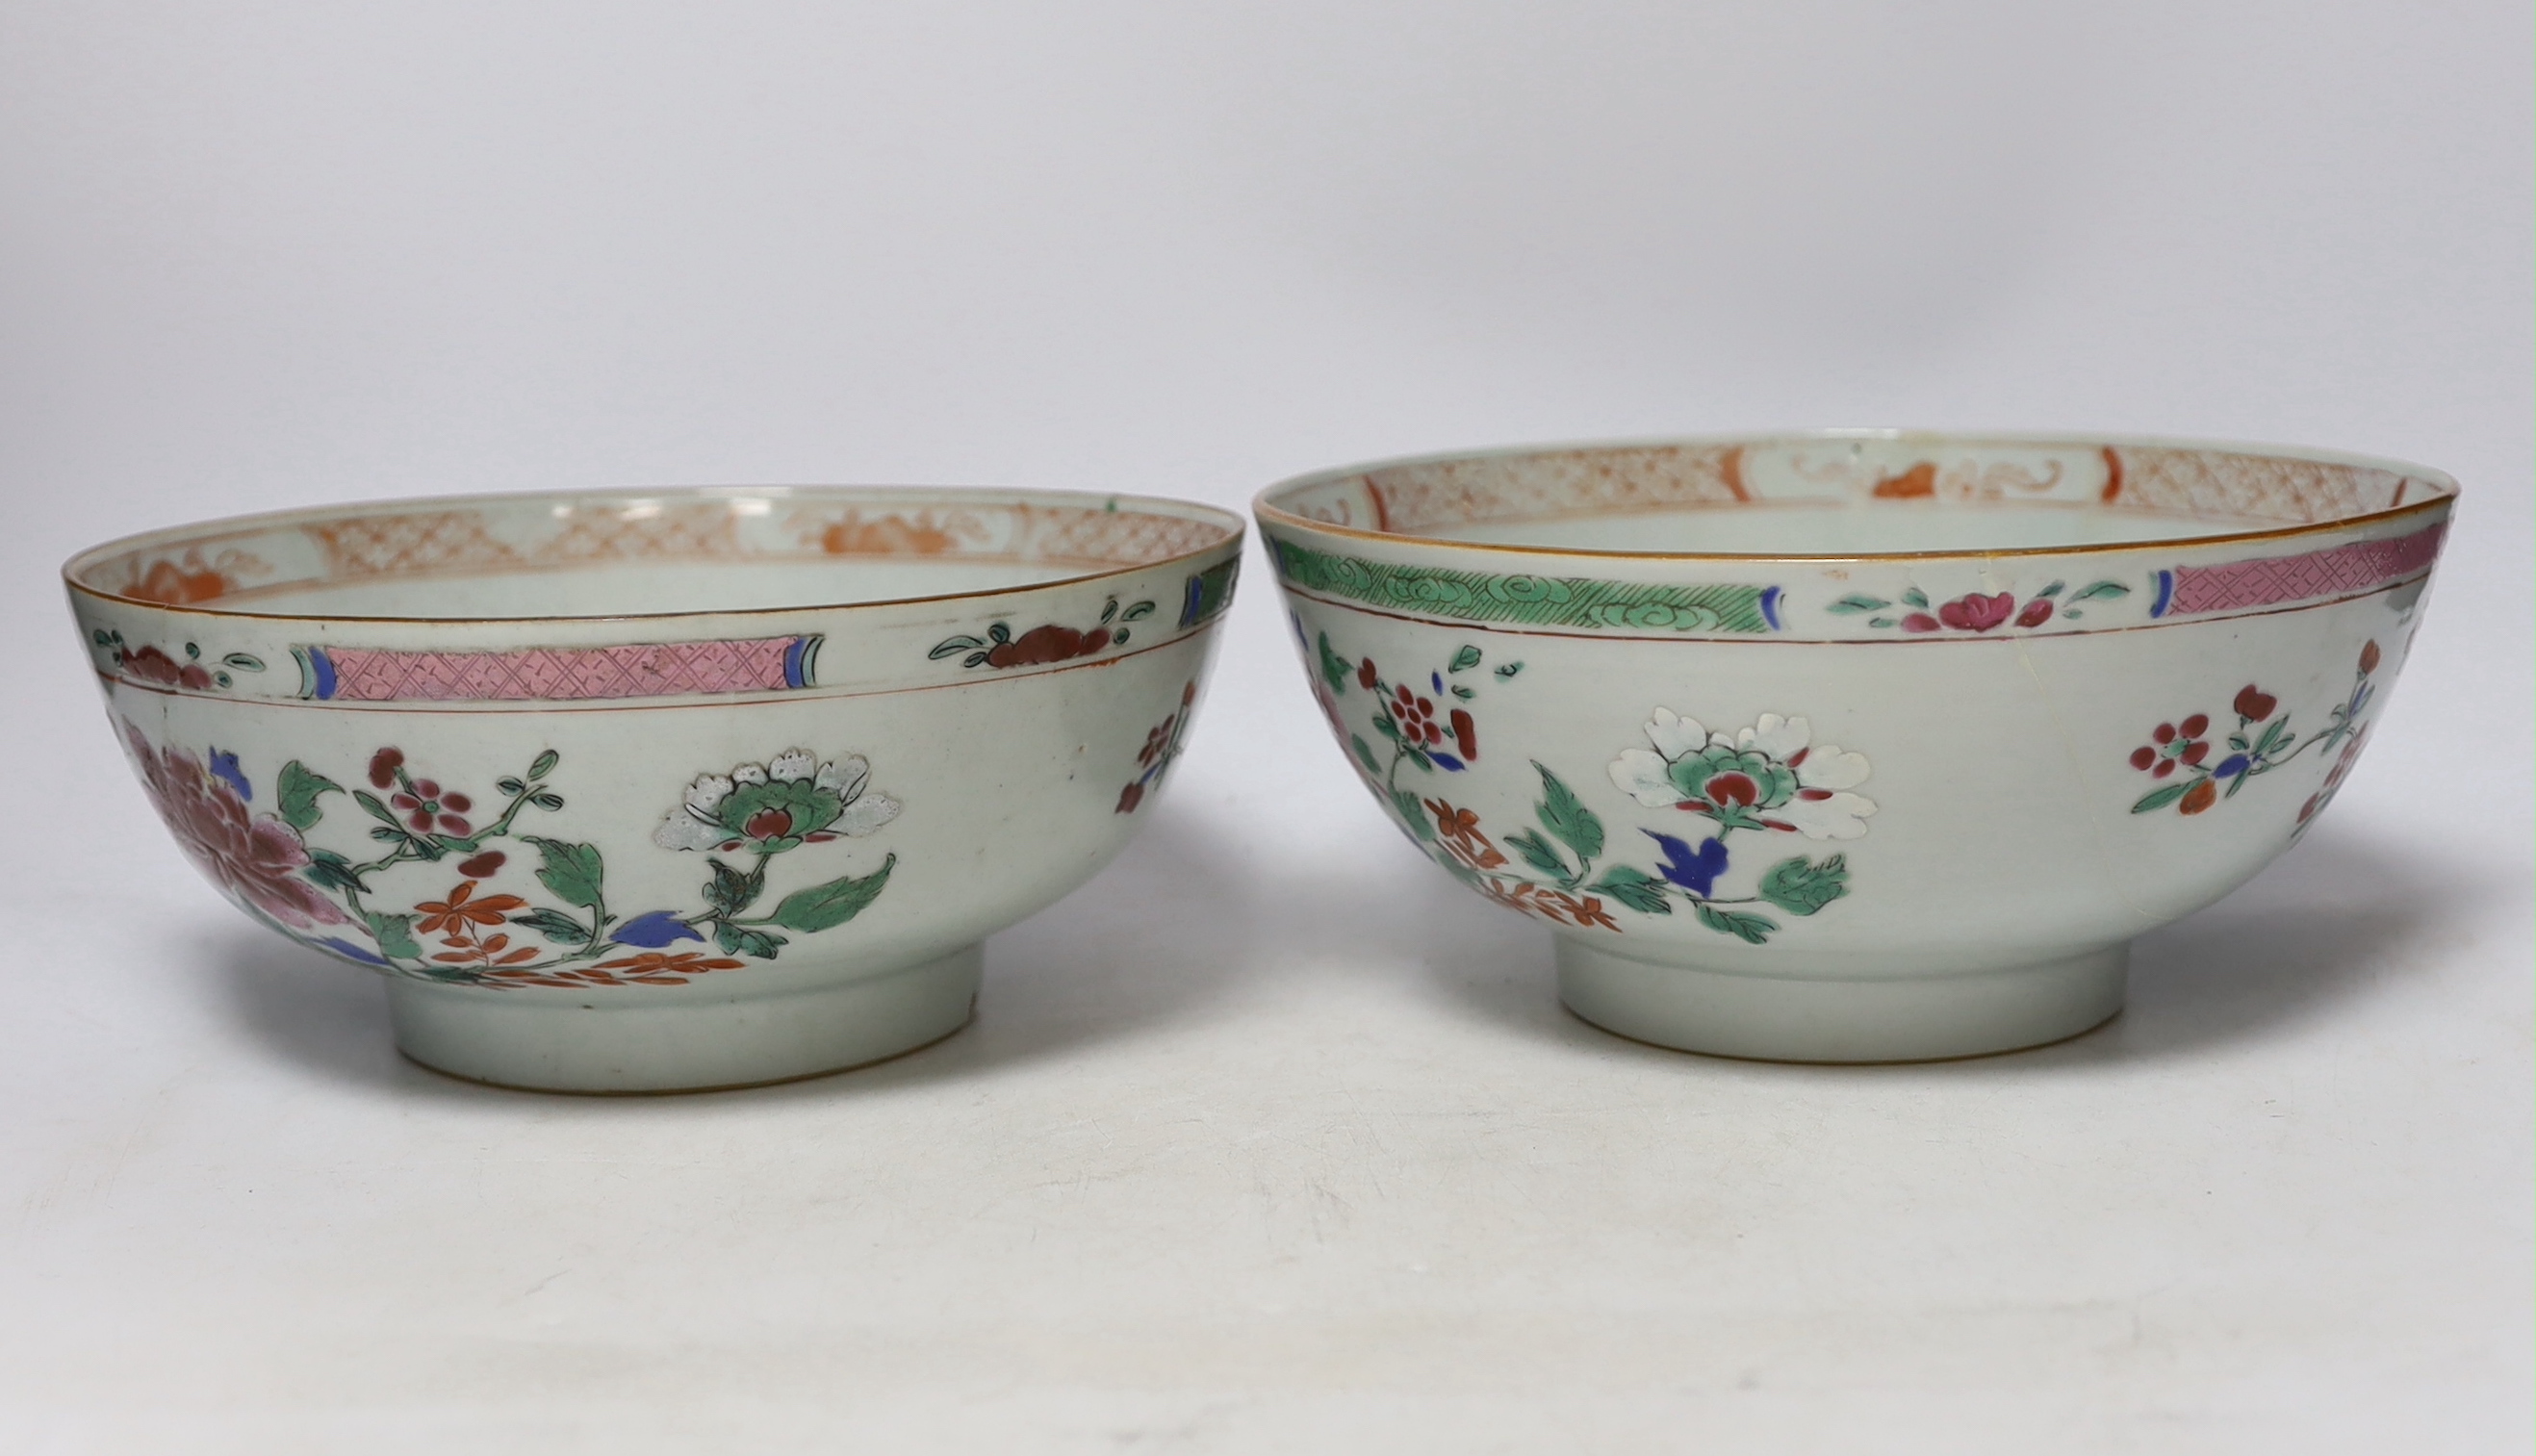 Two 18th century Chinese export famille rose bowls, 23.5cm diameter - Image 2 of 4